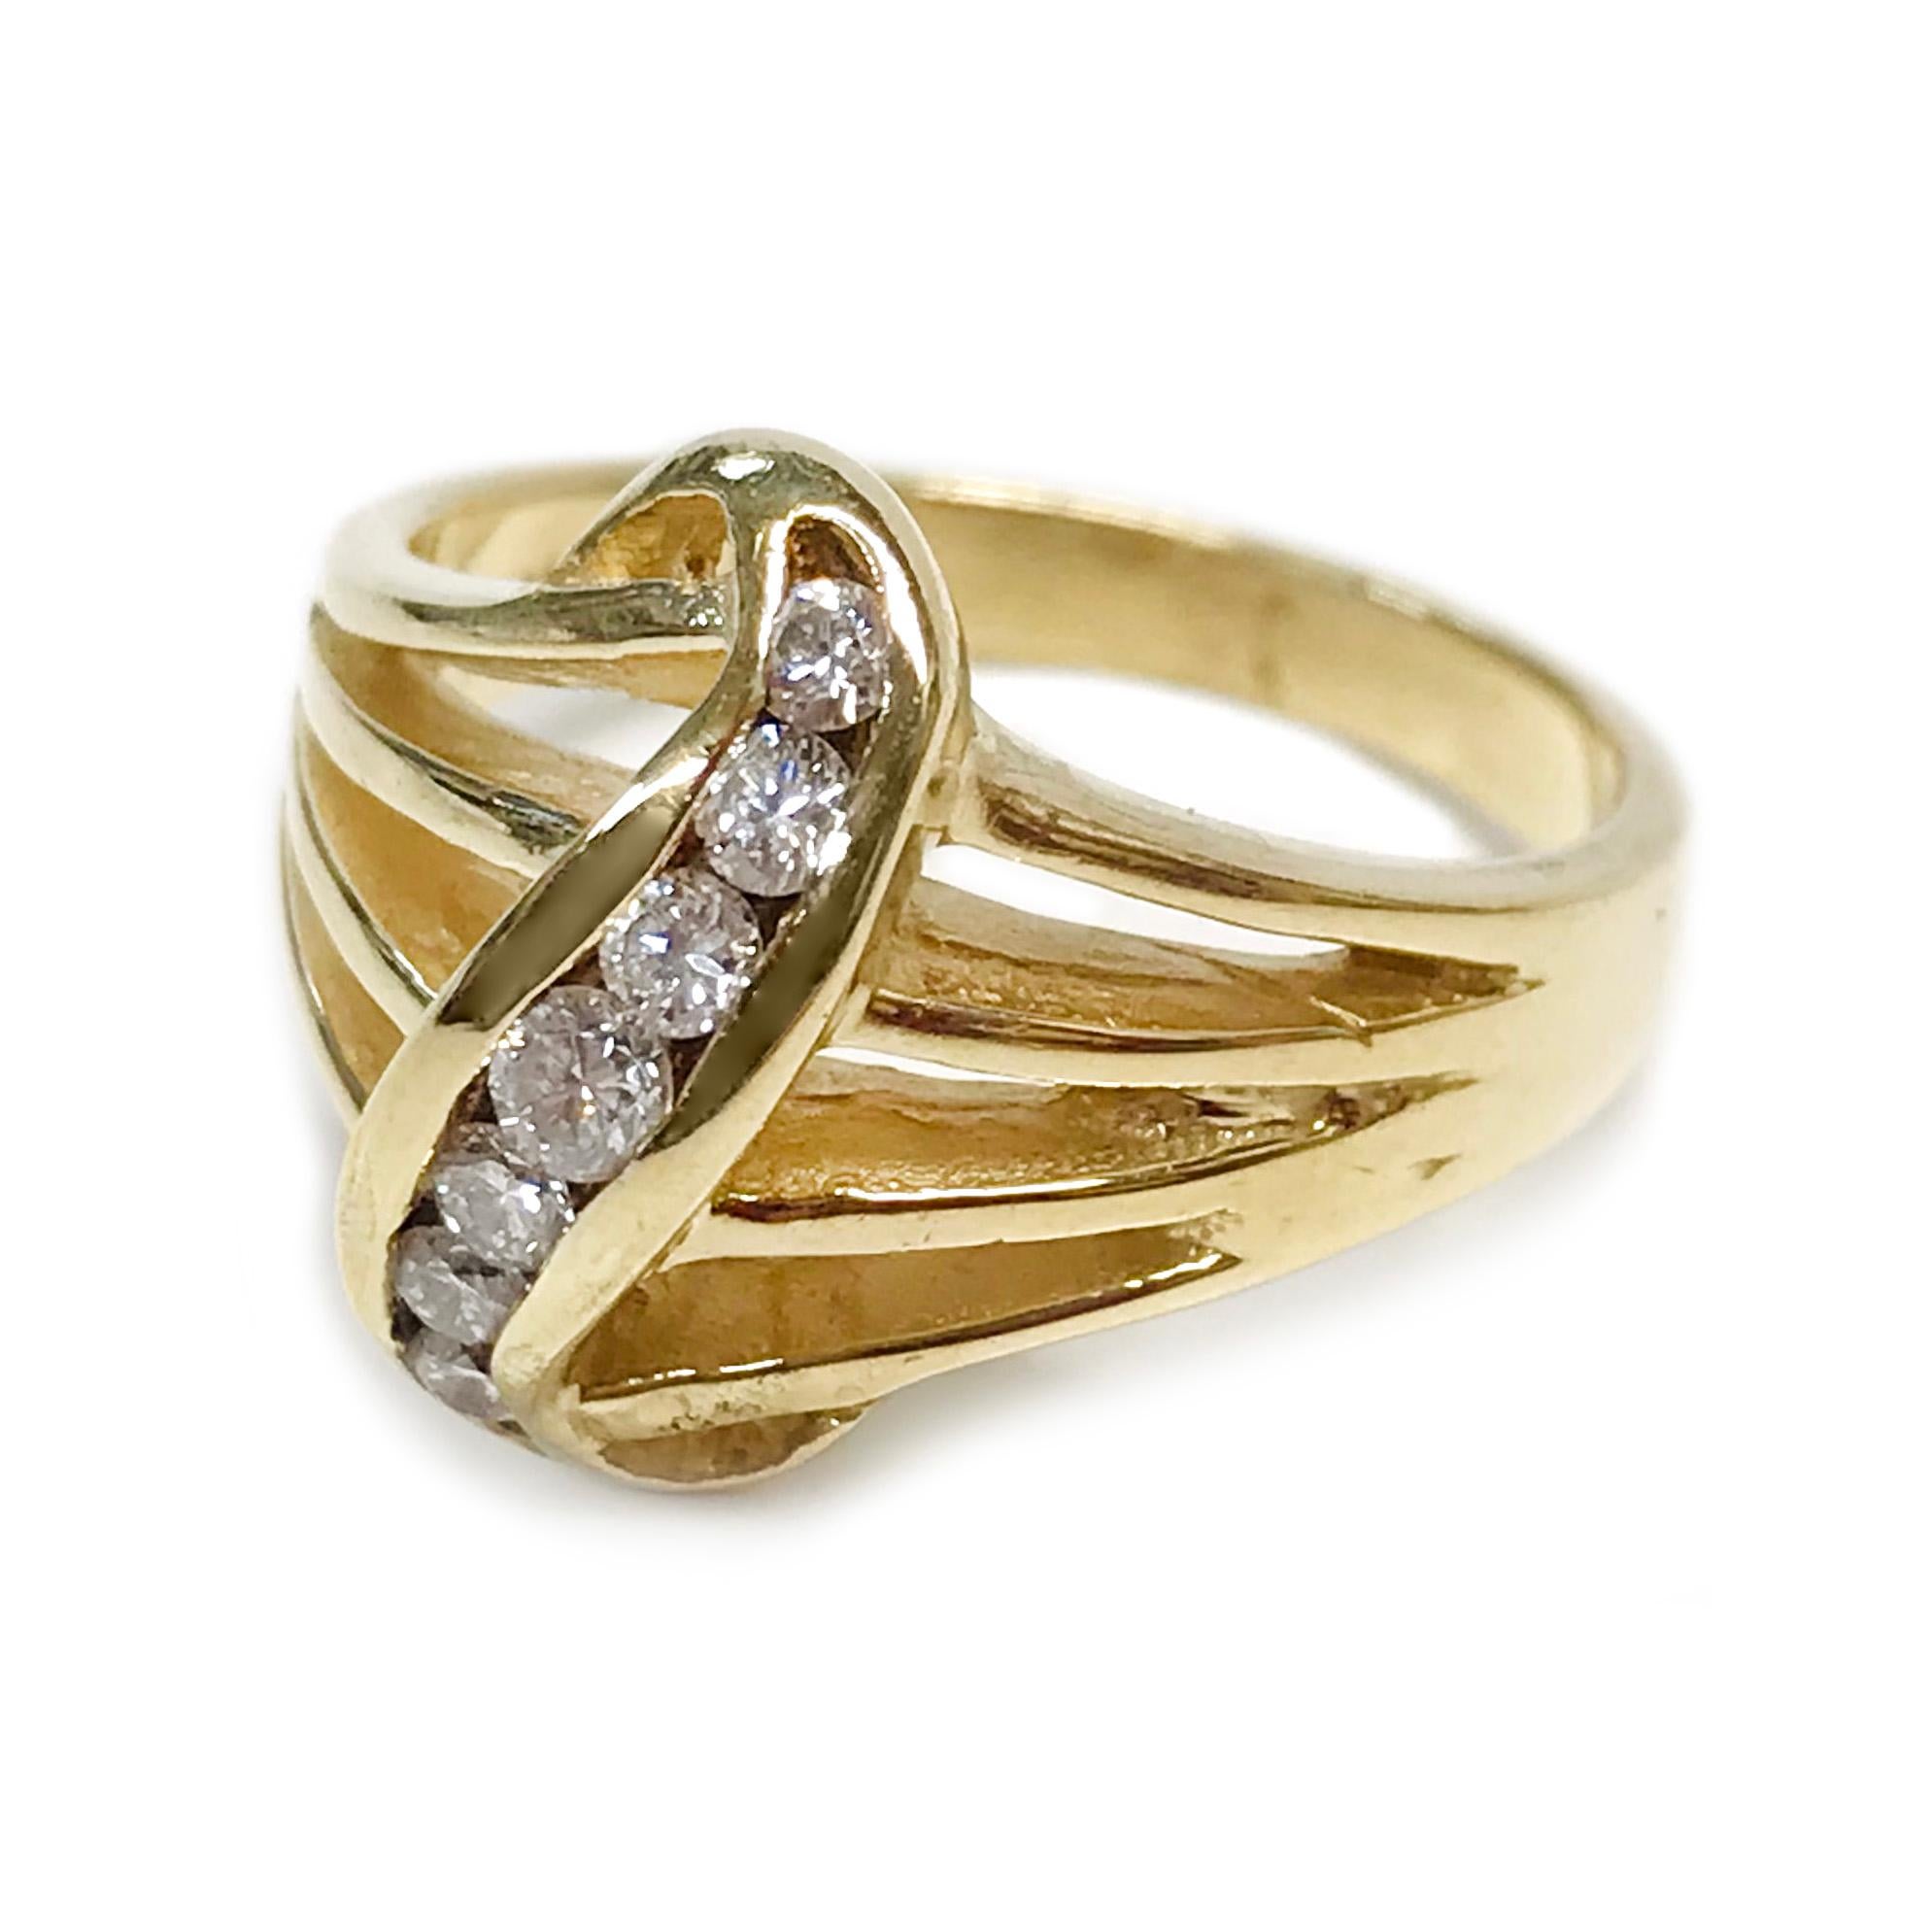 14 Karat Seven-Diamond Ring. The multi-split band ring features seven round channel-set diamonds vertically-set at the center in a gold curve. The diamonds range in size from 2.0mm to 2.5mm. The seven diamonds have a total carat weight of 0.20ctw.